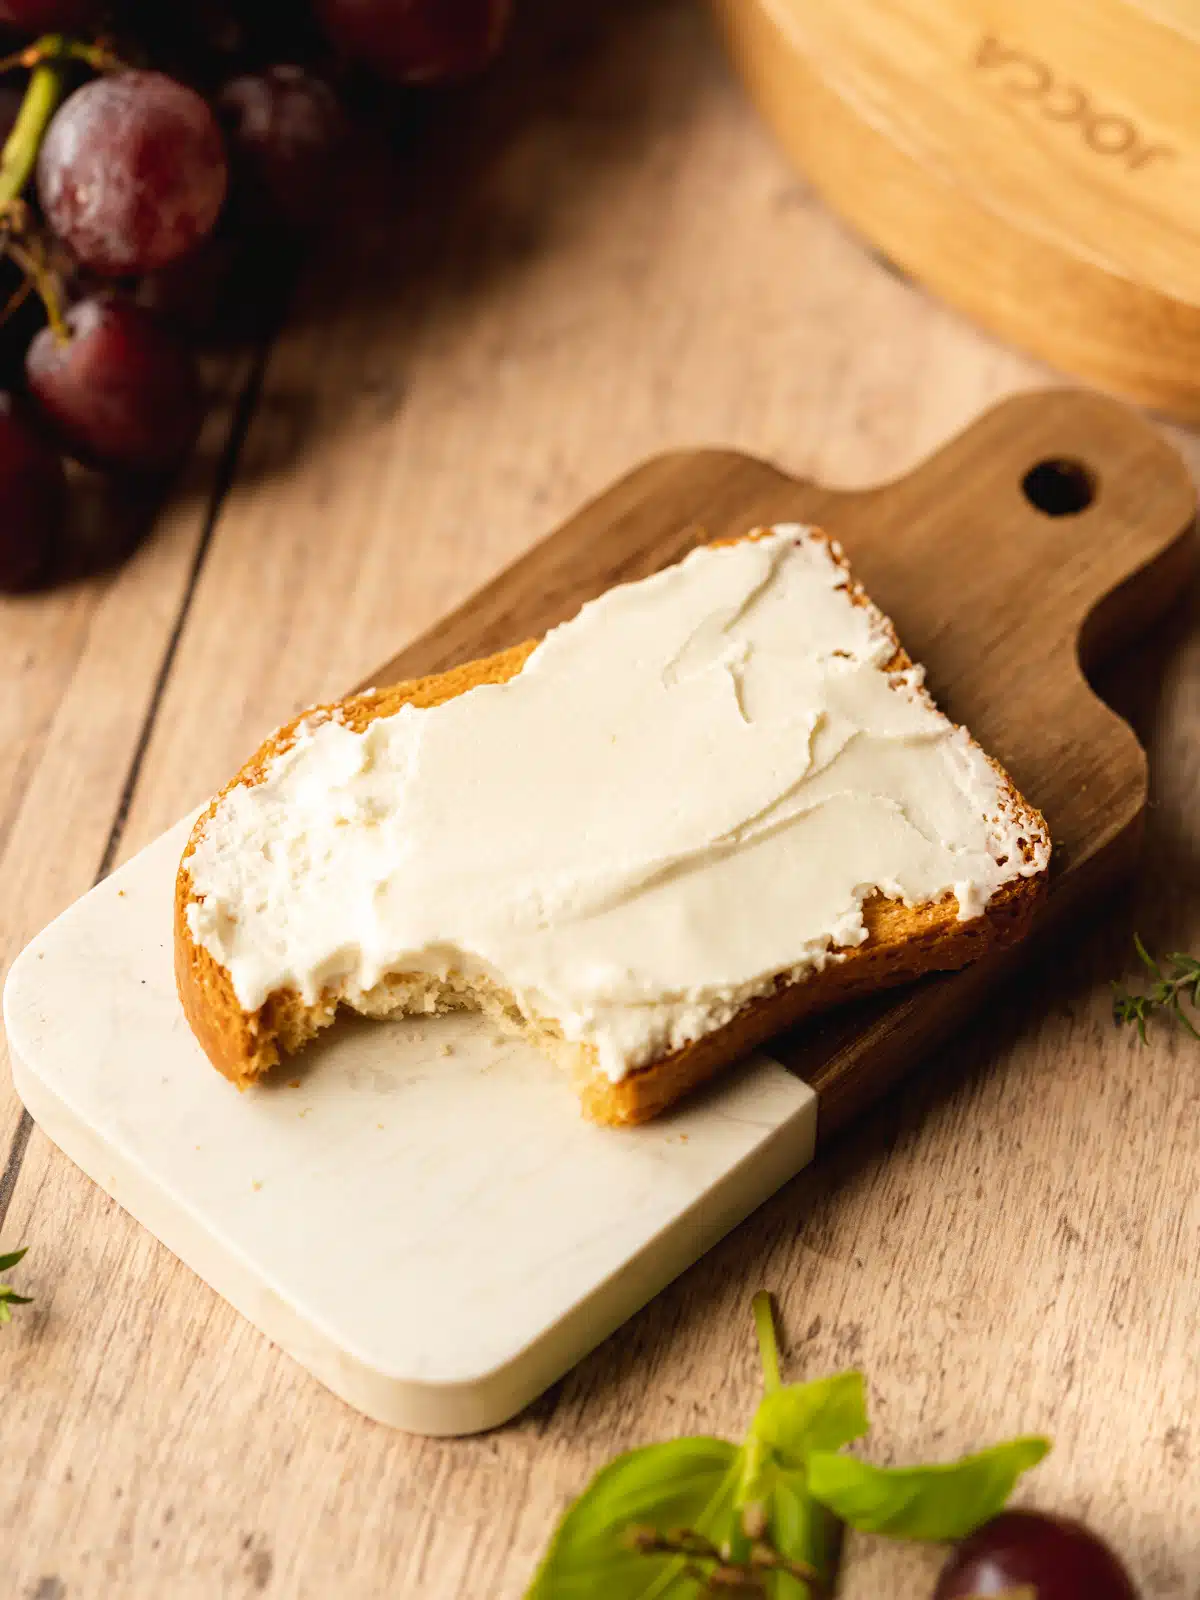 slice of toast topped with a smear of homemade vegan cream cheese on a two-toned cutting board with a wooden handle.